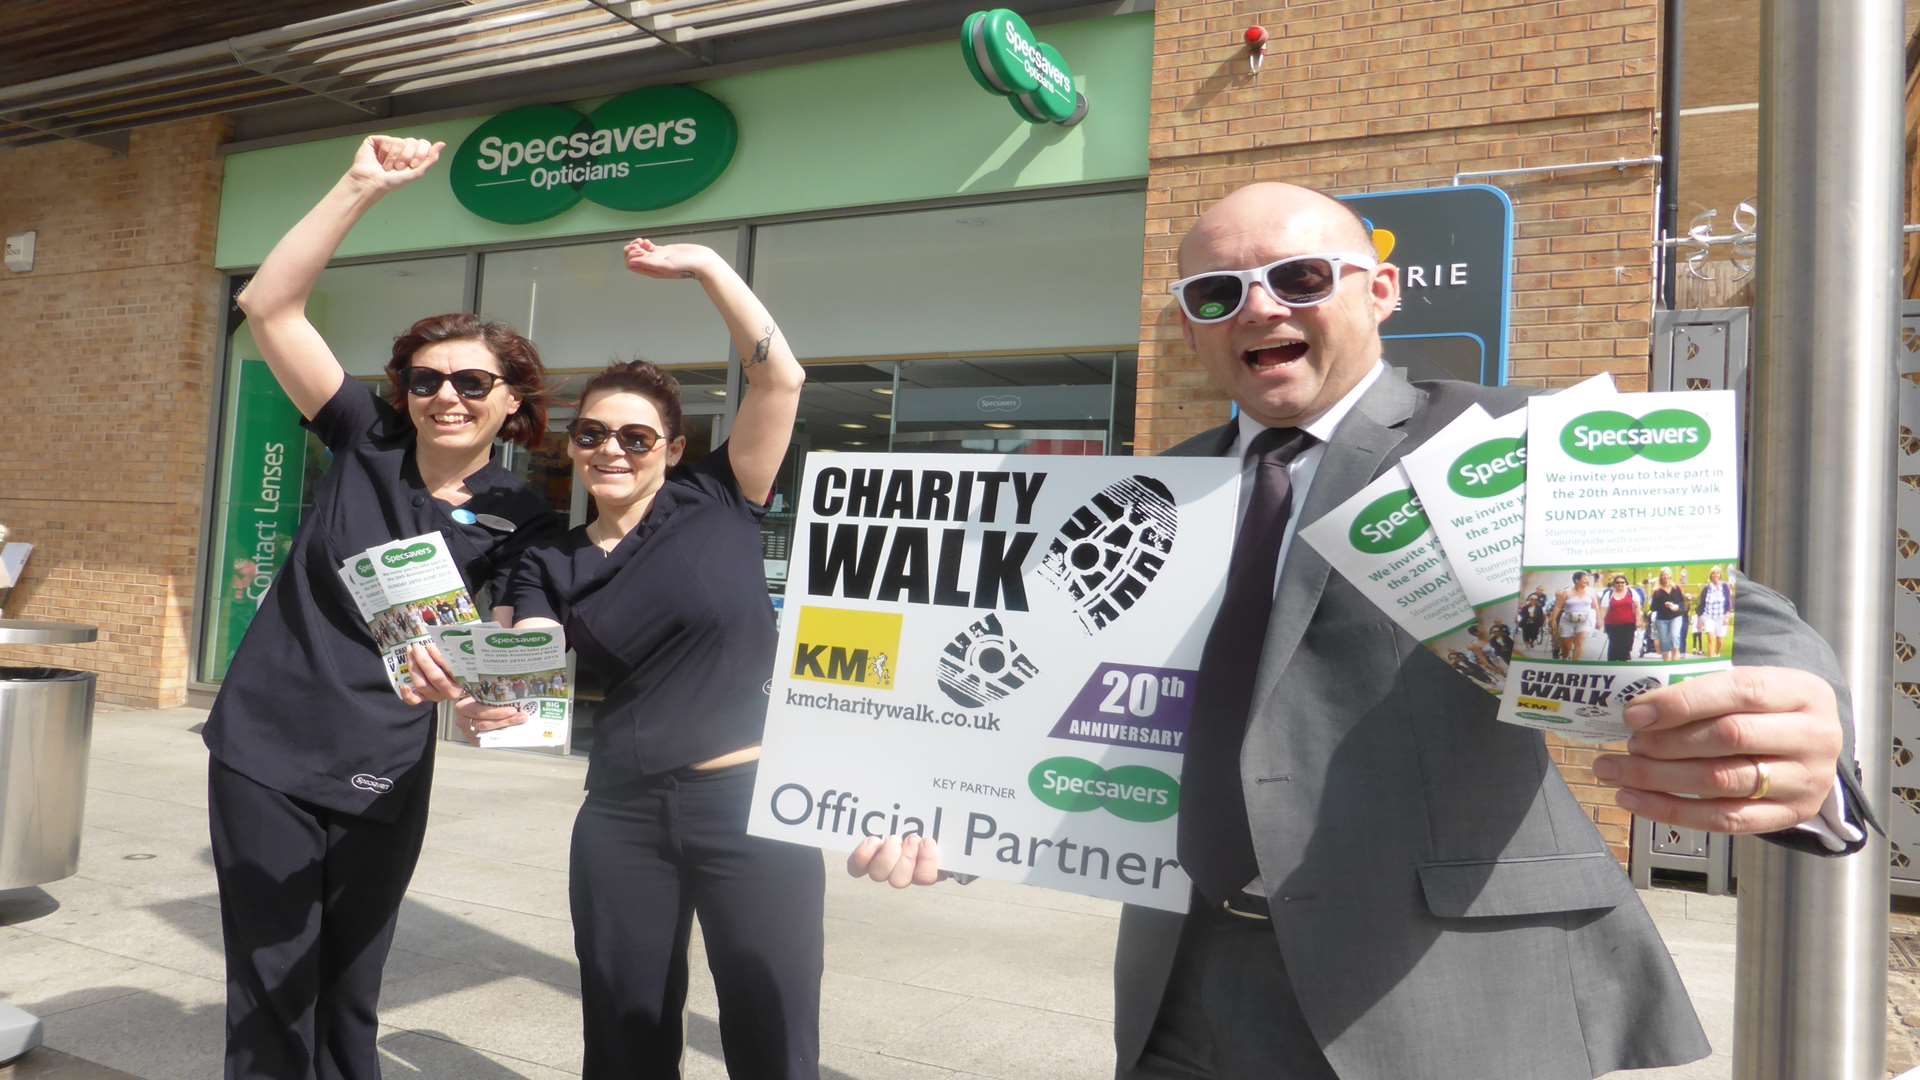 Folkestone Specsavers director David Cavender joins Alison Potter and Zoe OBrien to promote the 20th anniversary KM Charity Walk